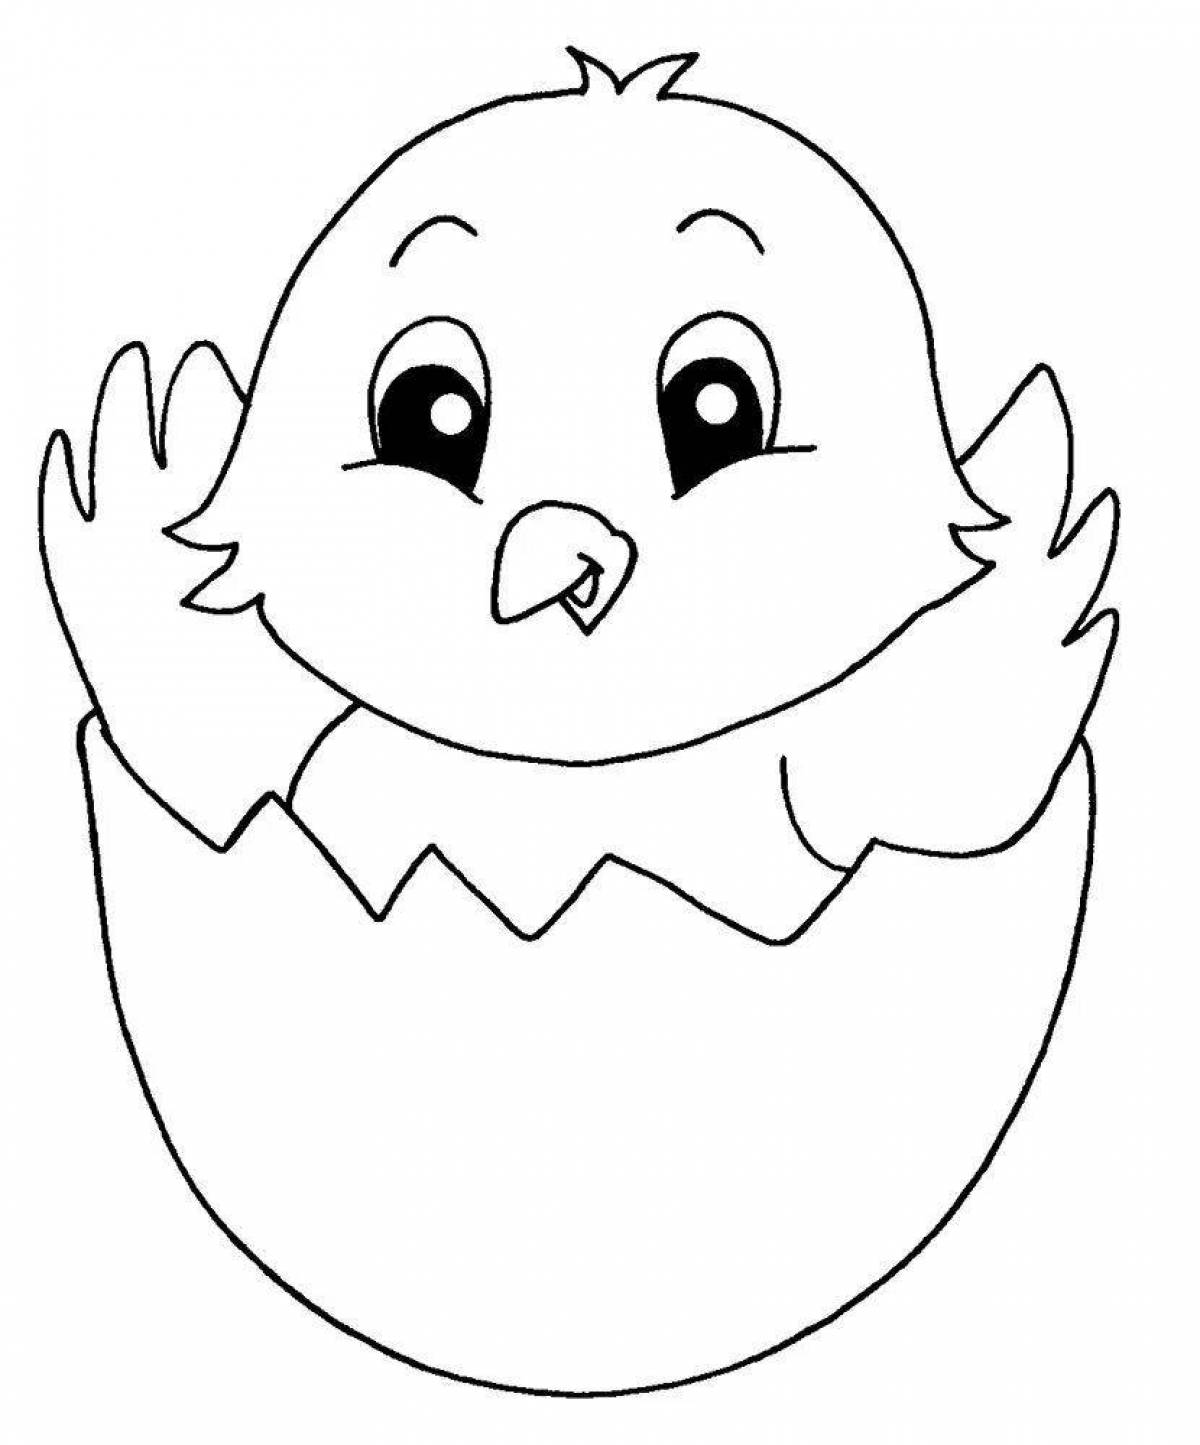 Compassionate chicken in egg coloring page